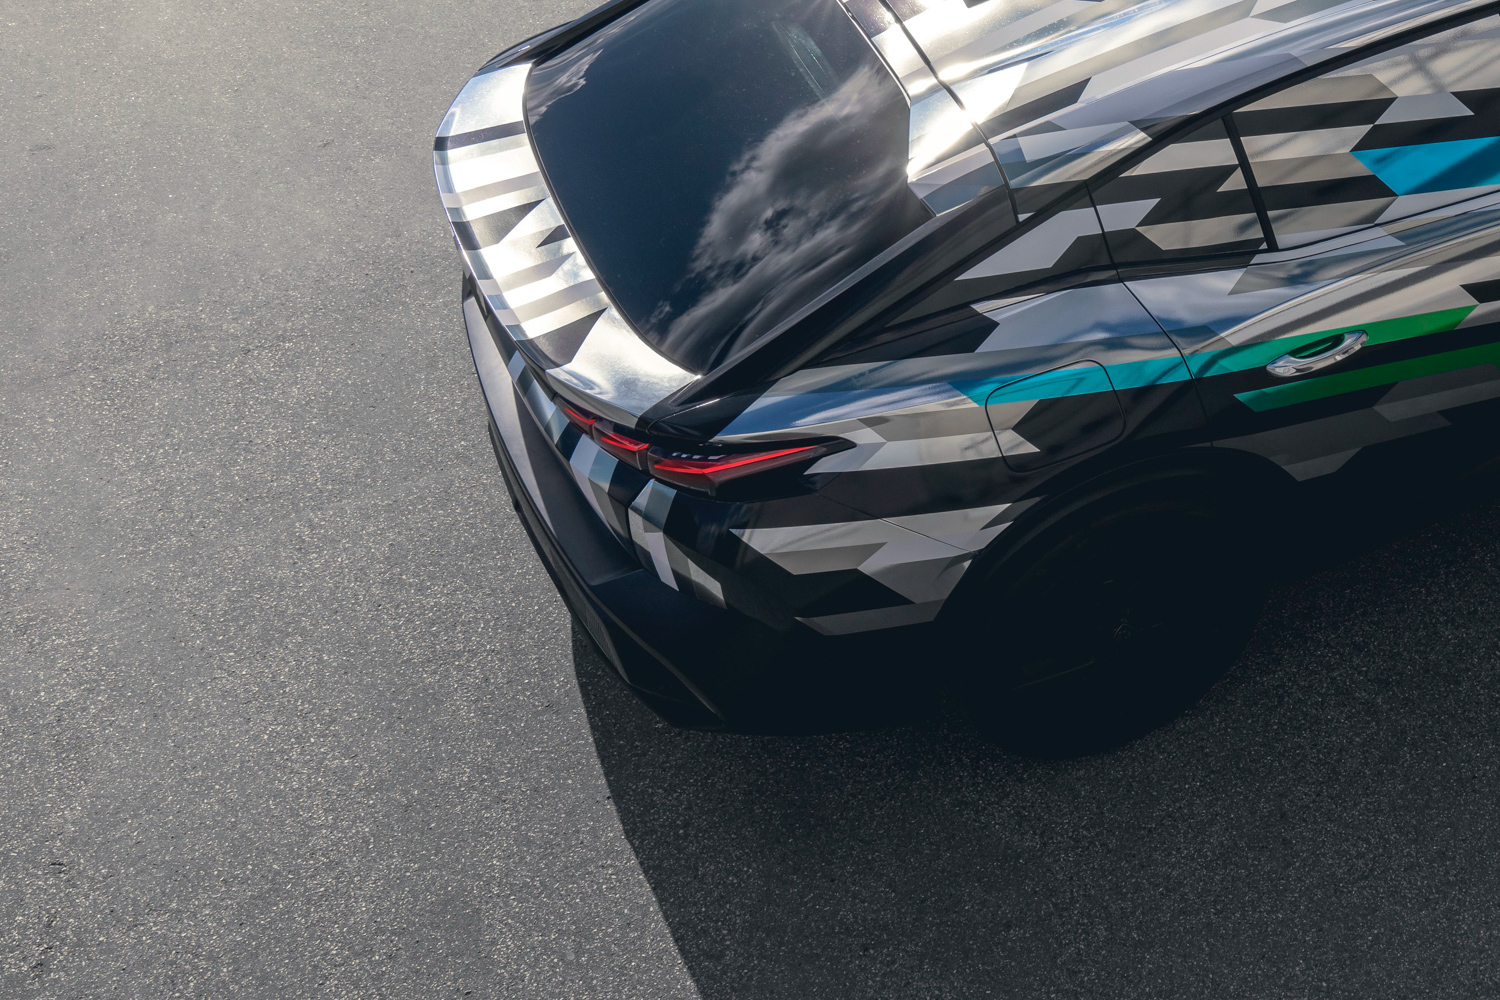 Peugeot teases styling of new 408